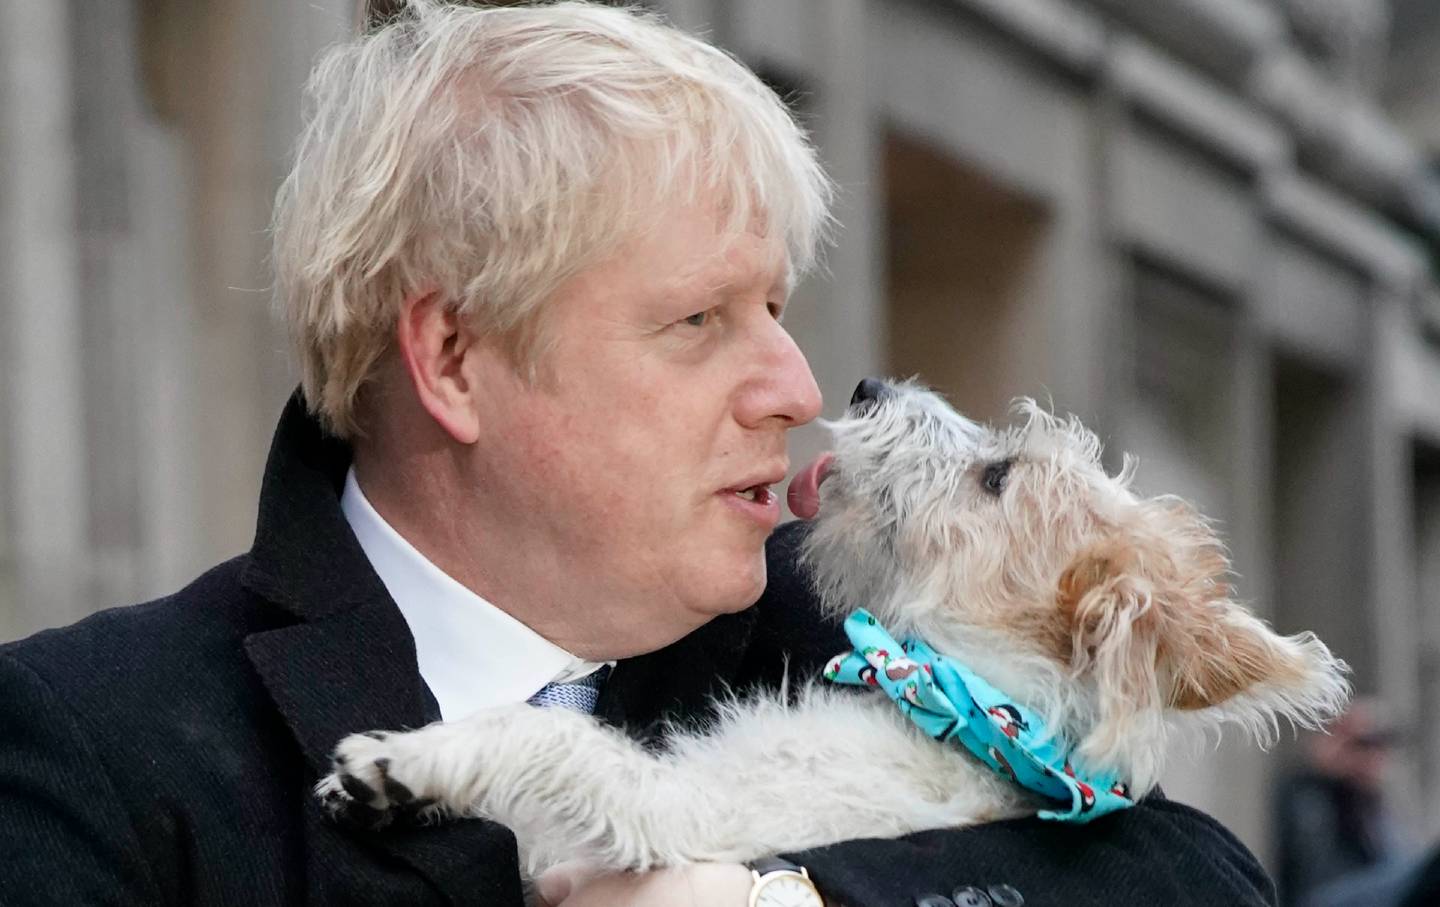 While Afghans Tried to Flee, Boris Johnson… Saved Dogs?